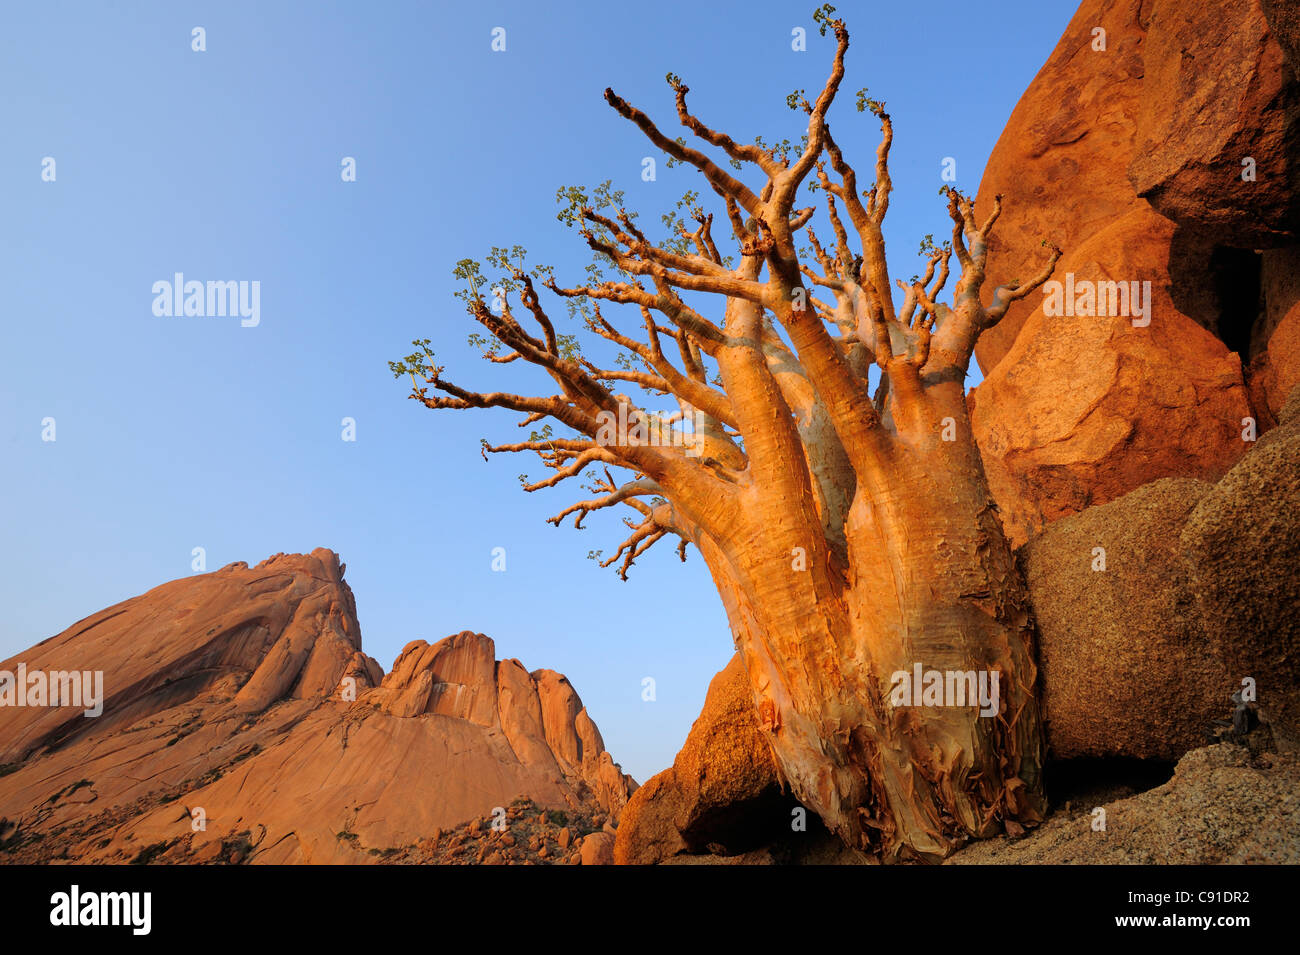 Wild grape in front of Great Spitzkoppe, Cyphostemma juttae, Great Spitzkoppe, Namibia Stock Photo